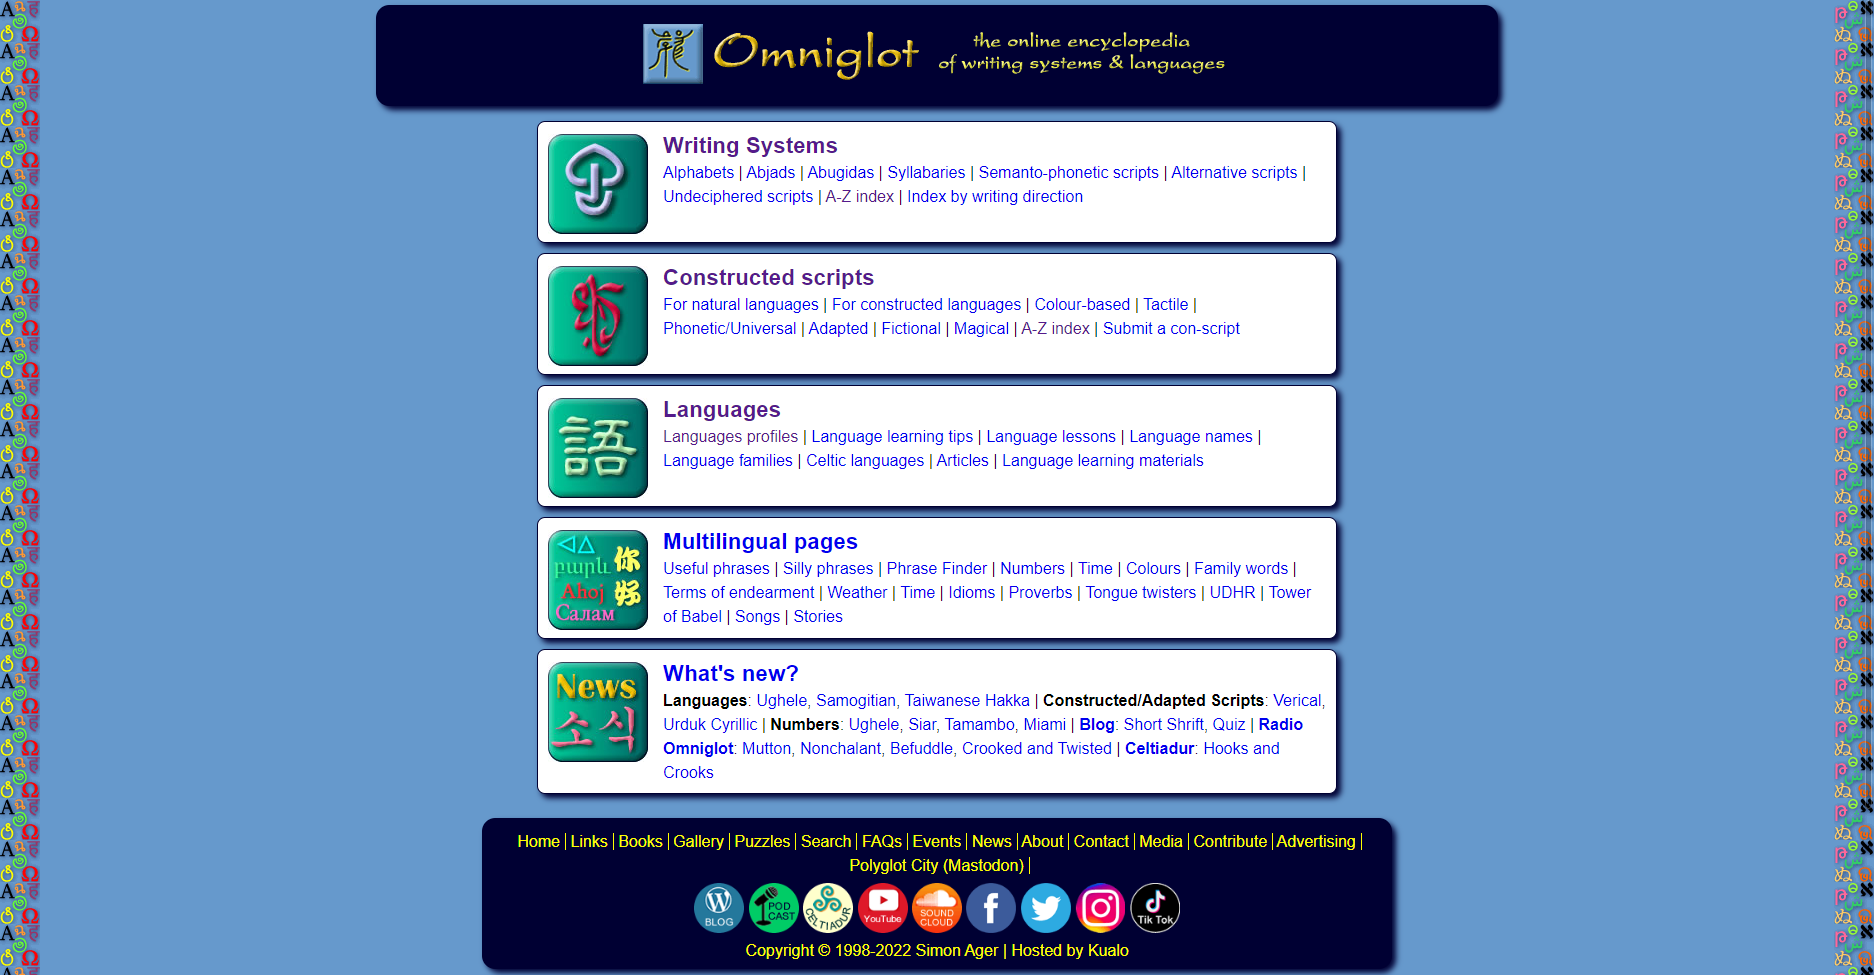 Preview image of Omniglot